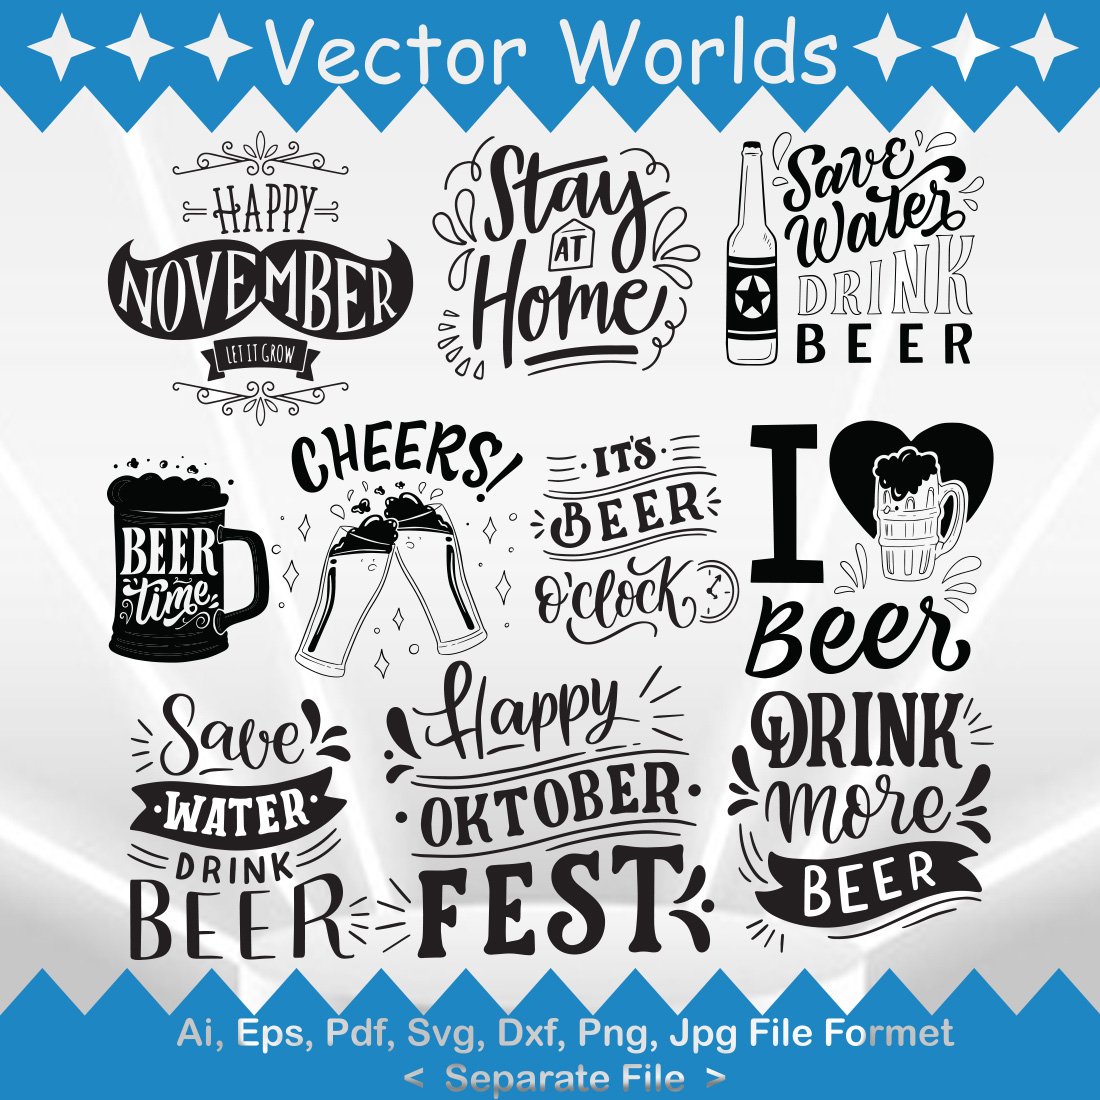 Happy Beer Day SVG Vector Design cover image.